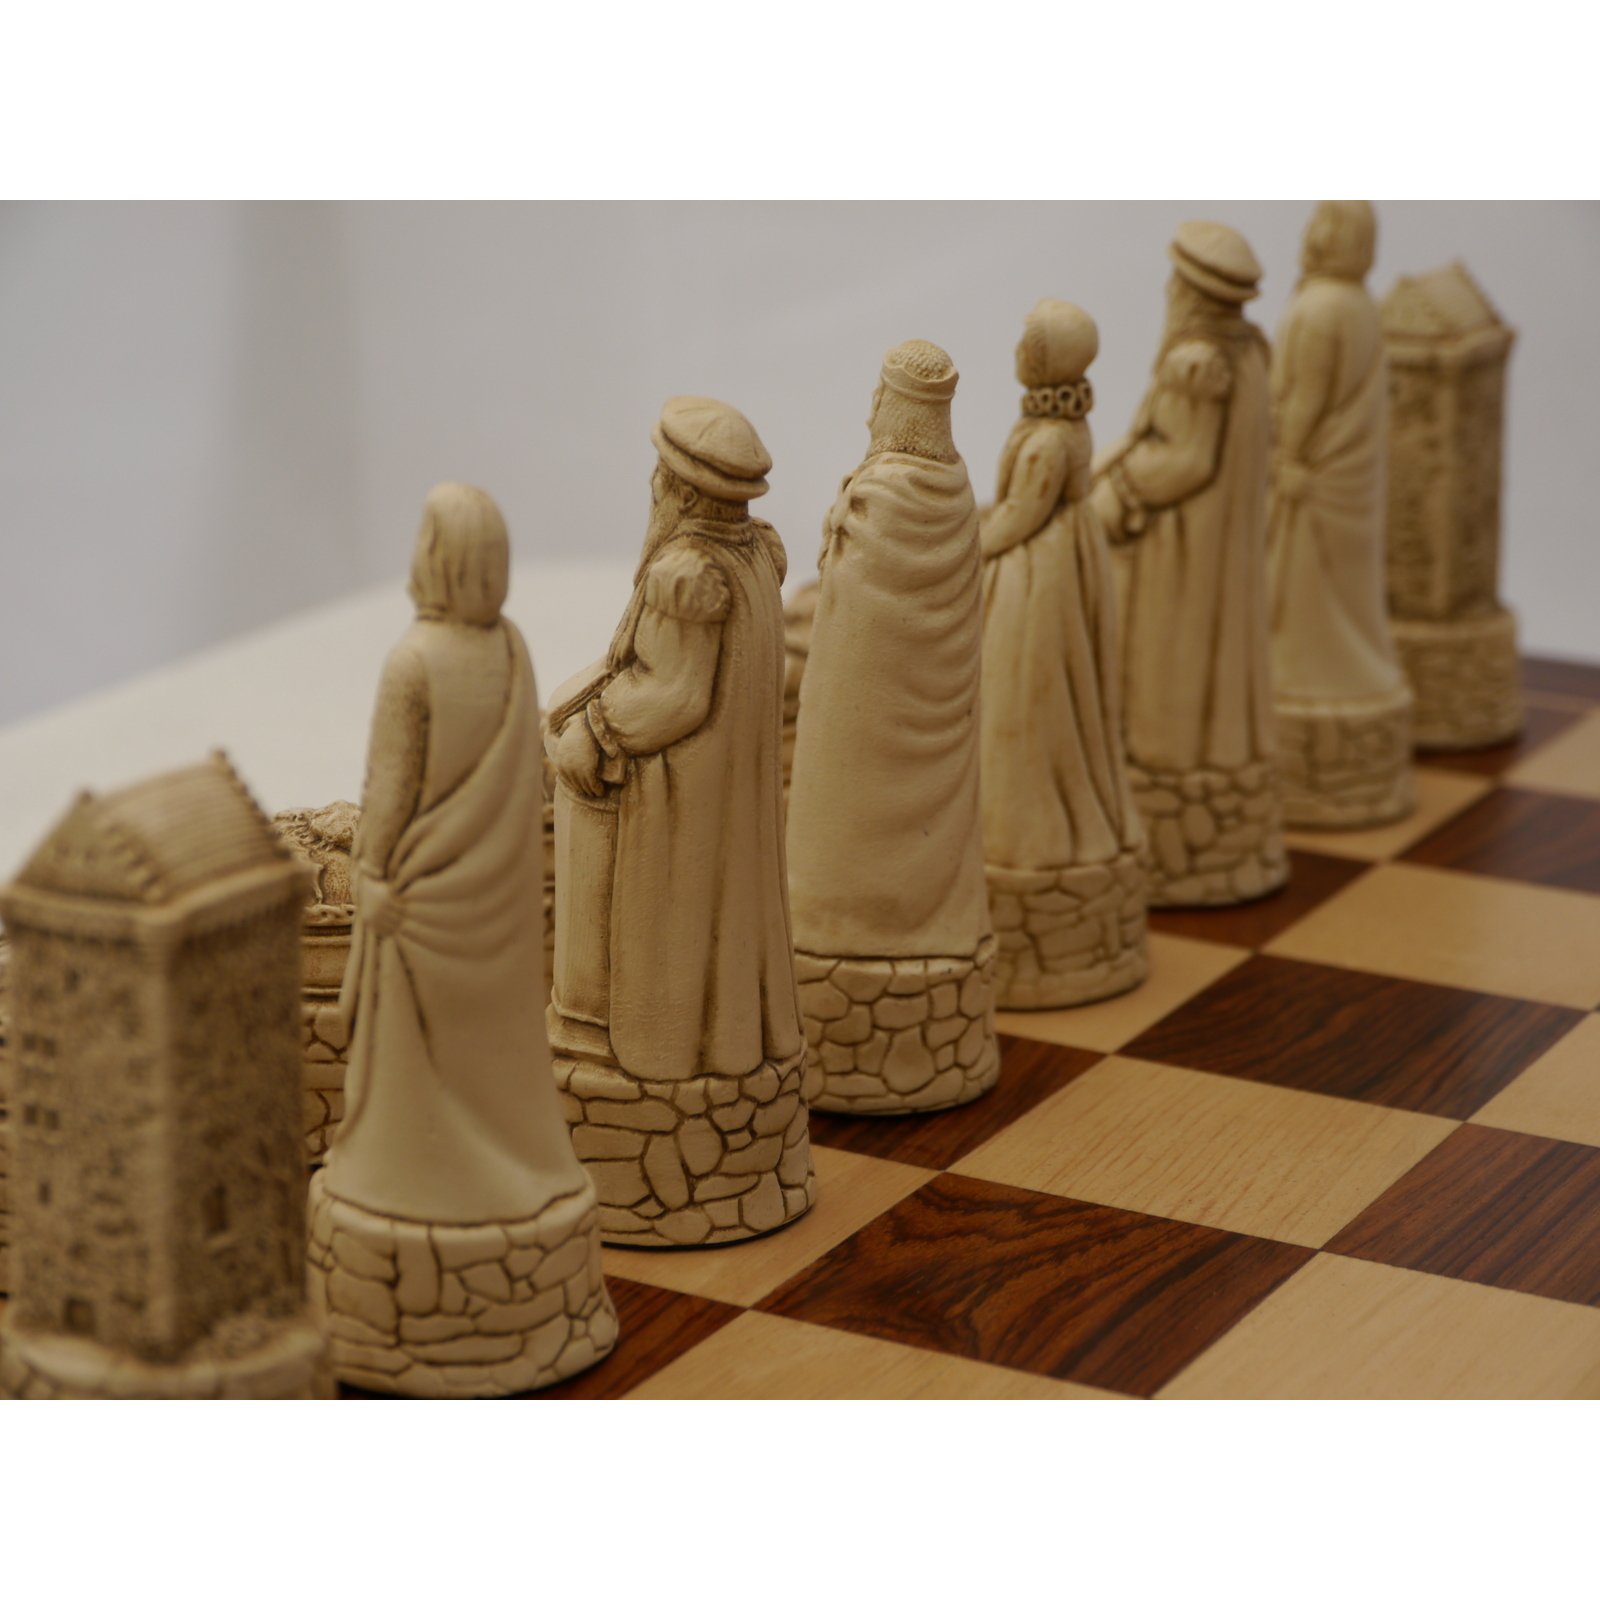 English and Scottish Crushed Stone Chess Pieces